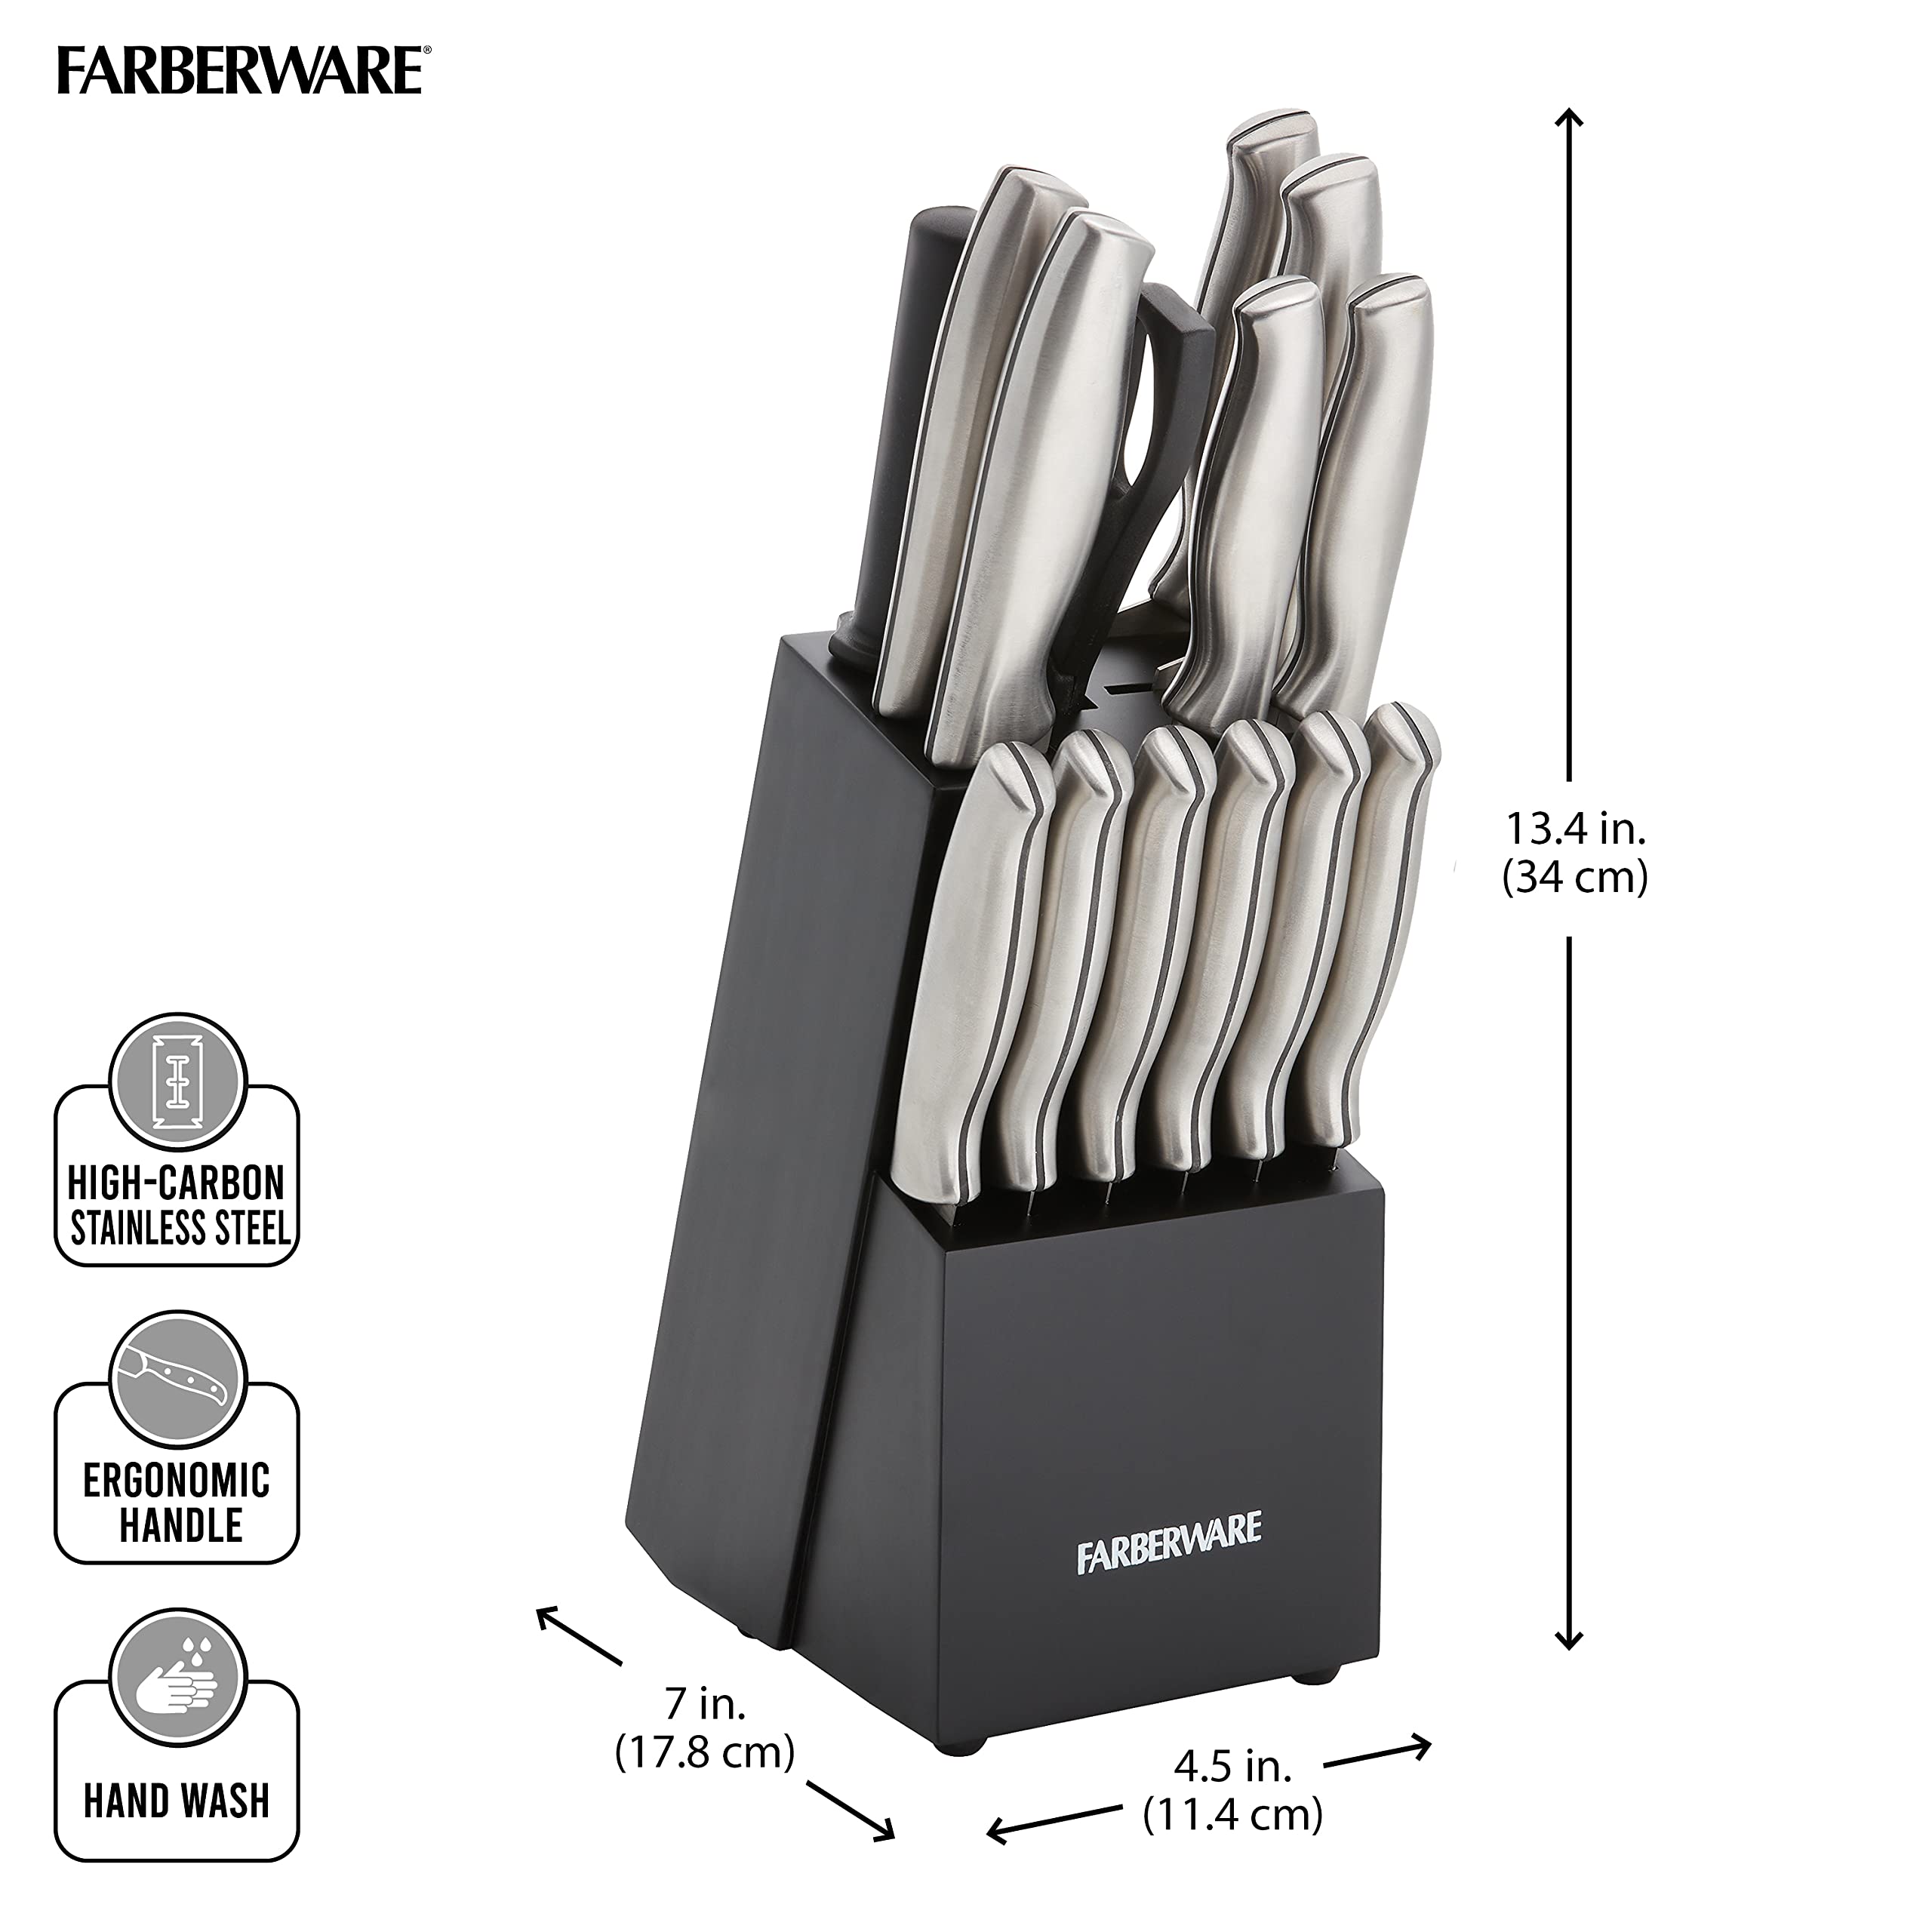 Farberware 15-Piece Stamped Stainless Steel Knife Block Set, High-Carbon Stainless Steel Kitchen Knife Set with Ergonomic Handles, Razor-Sharp Knives with Wood Block, 15-Piece, Black 2